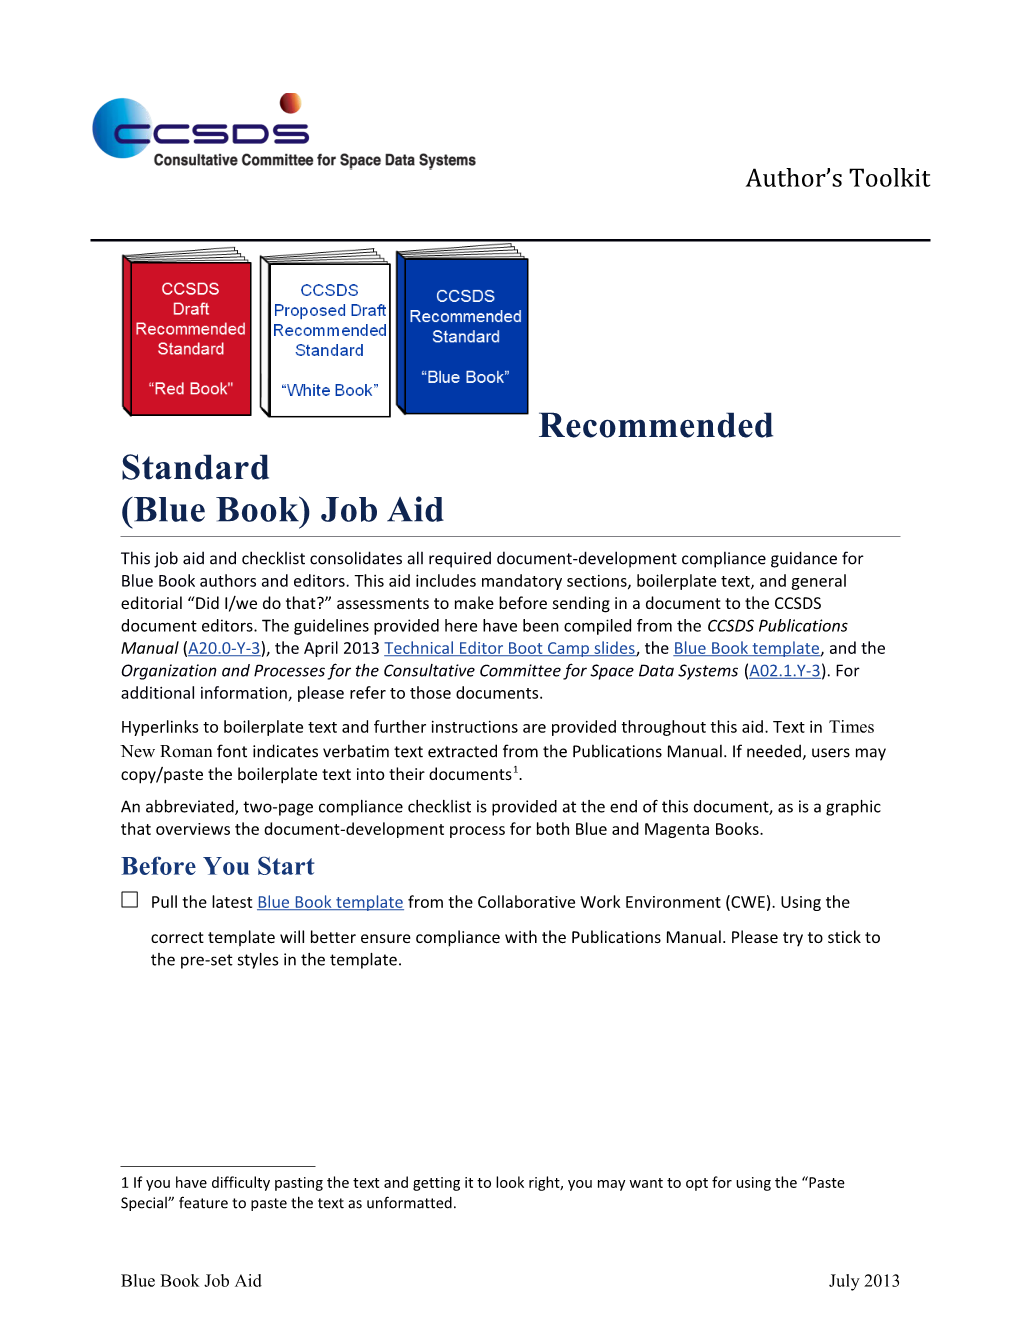 Recommended Standard (Blue Book) Job Aid